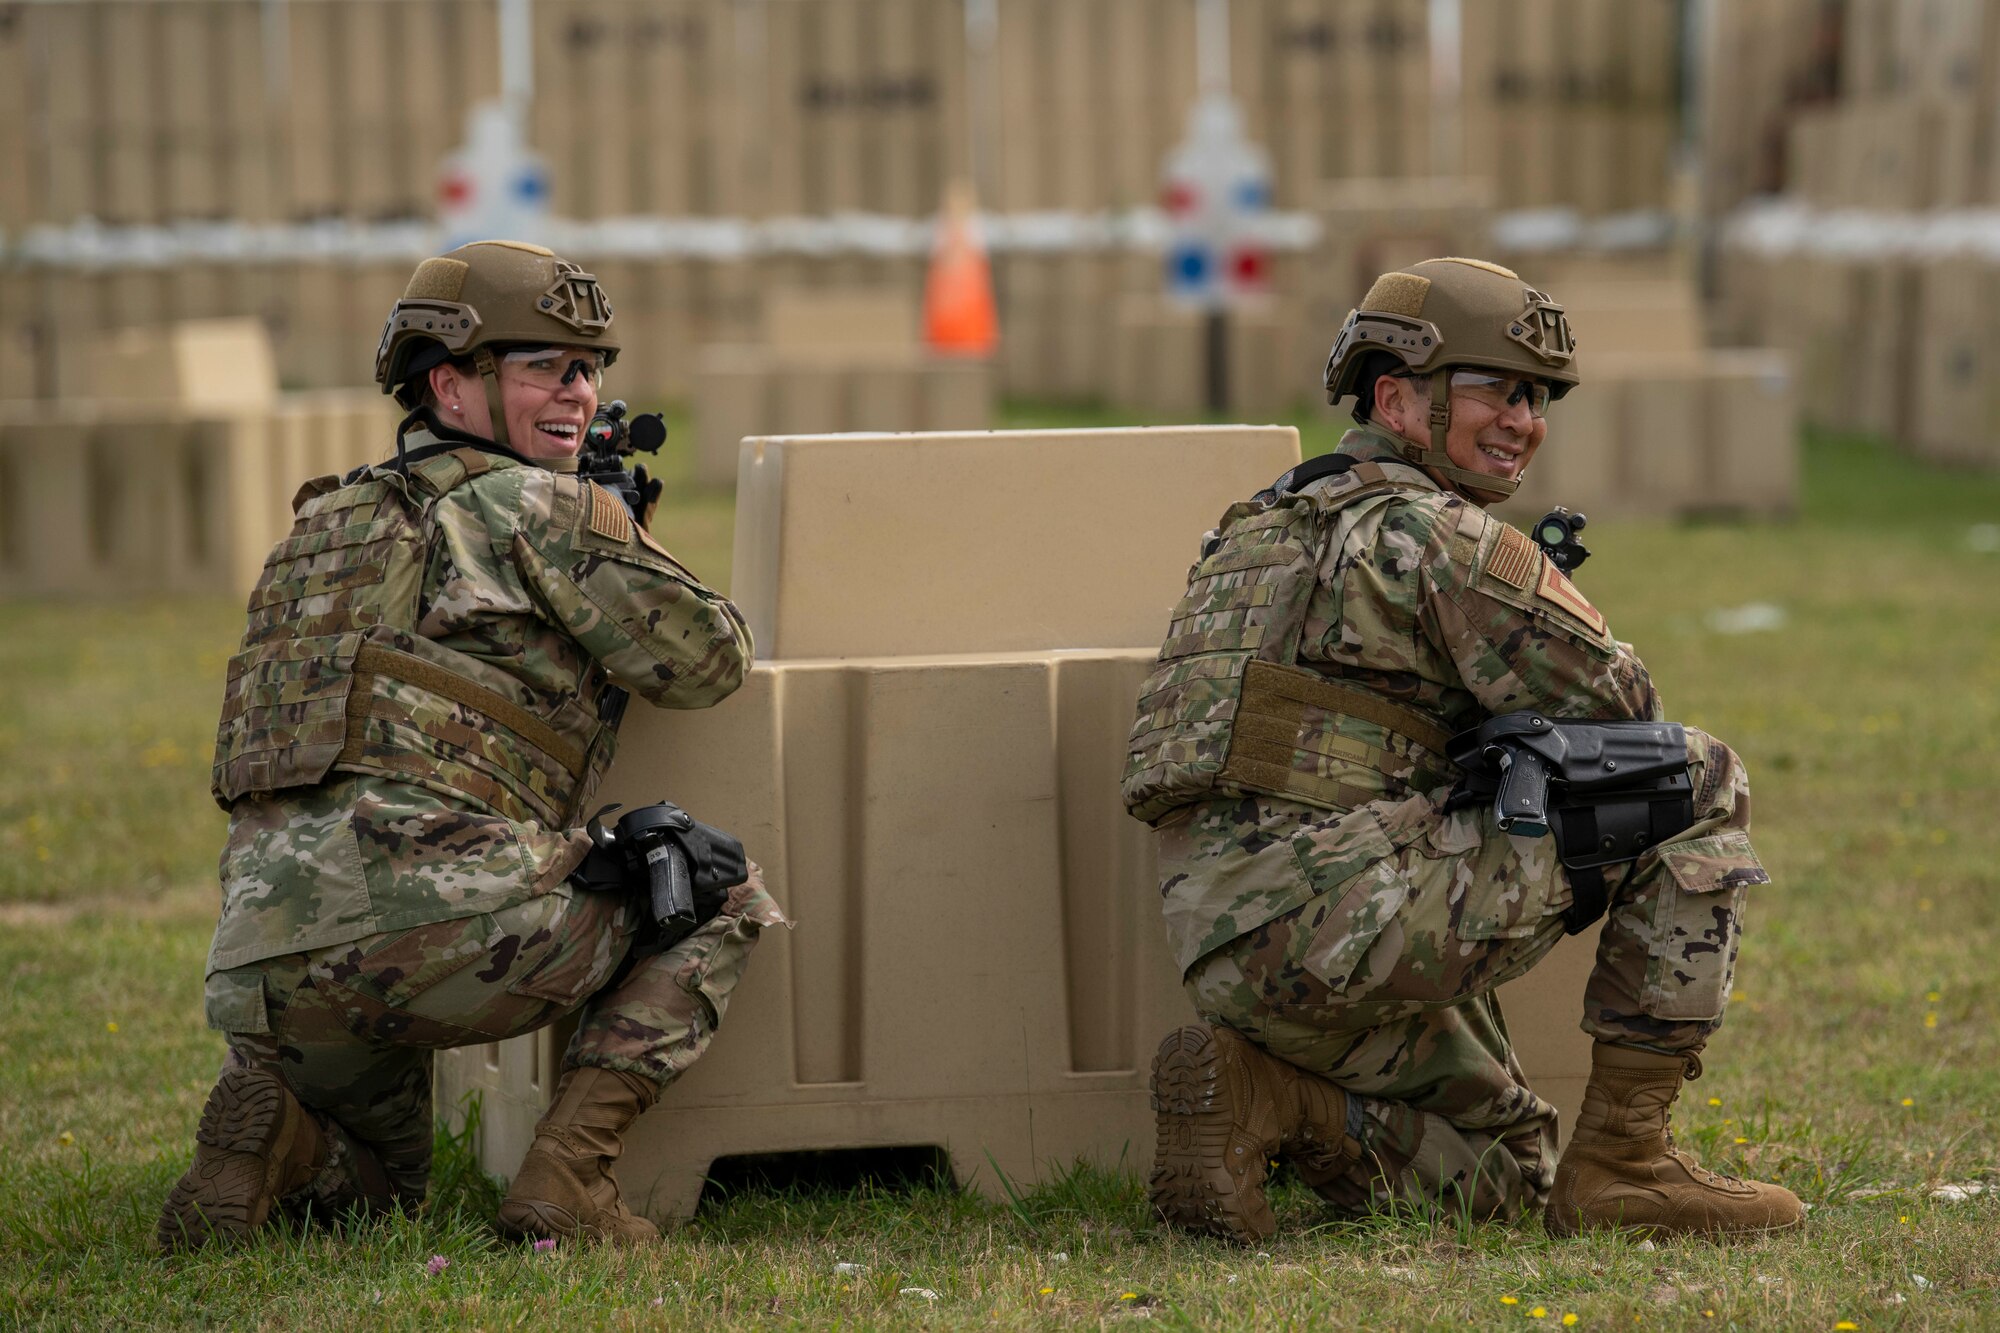 Chief Master Sgt. Kathi Glascock, left, 100th Air Refueling Wing command chief, and Col. Troy Pananon, 100th ARW commander, participate in shoot, move and communicate training with Airmen from the 100th Security Forces Squadron at RAF Mildenhall, England, Aug. 30, 2019. The purpose of the training was for the defenders to demonstrate their advanced combat skills for the commander and command Chief. (U.S. Air Force photo by Senior Airman Luke Milano)